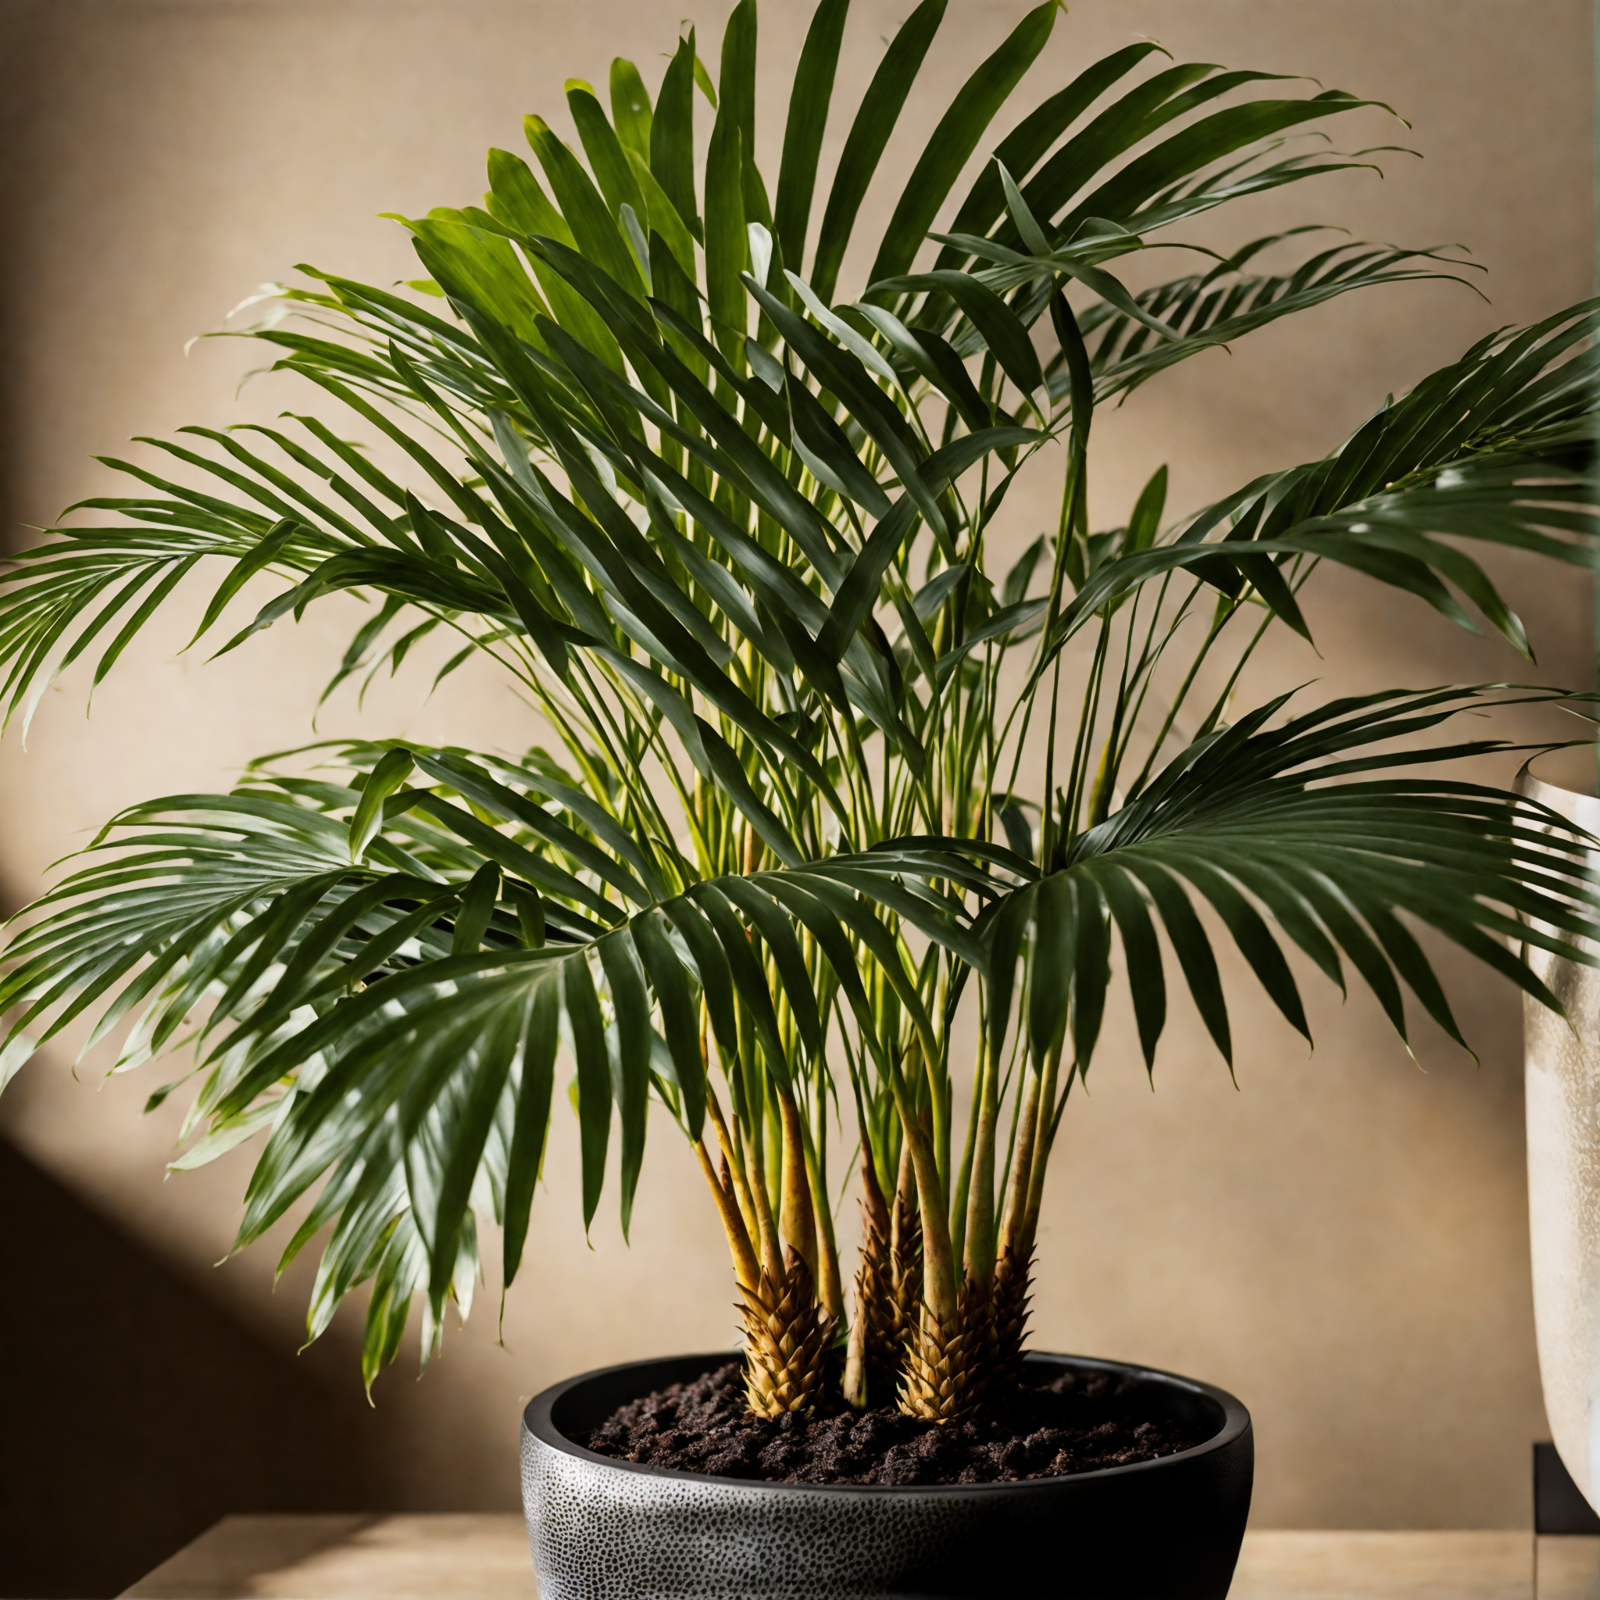 Howea forsteriana in a planter on a wooden table, with clear lighting and a dark background.